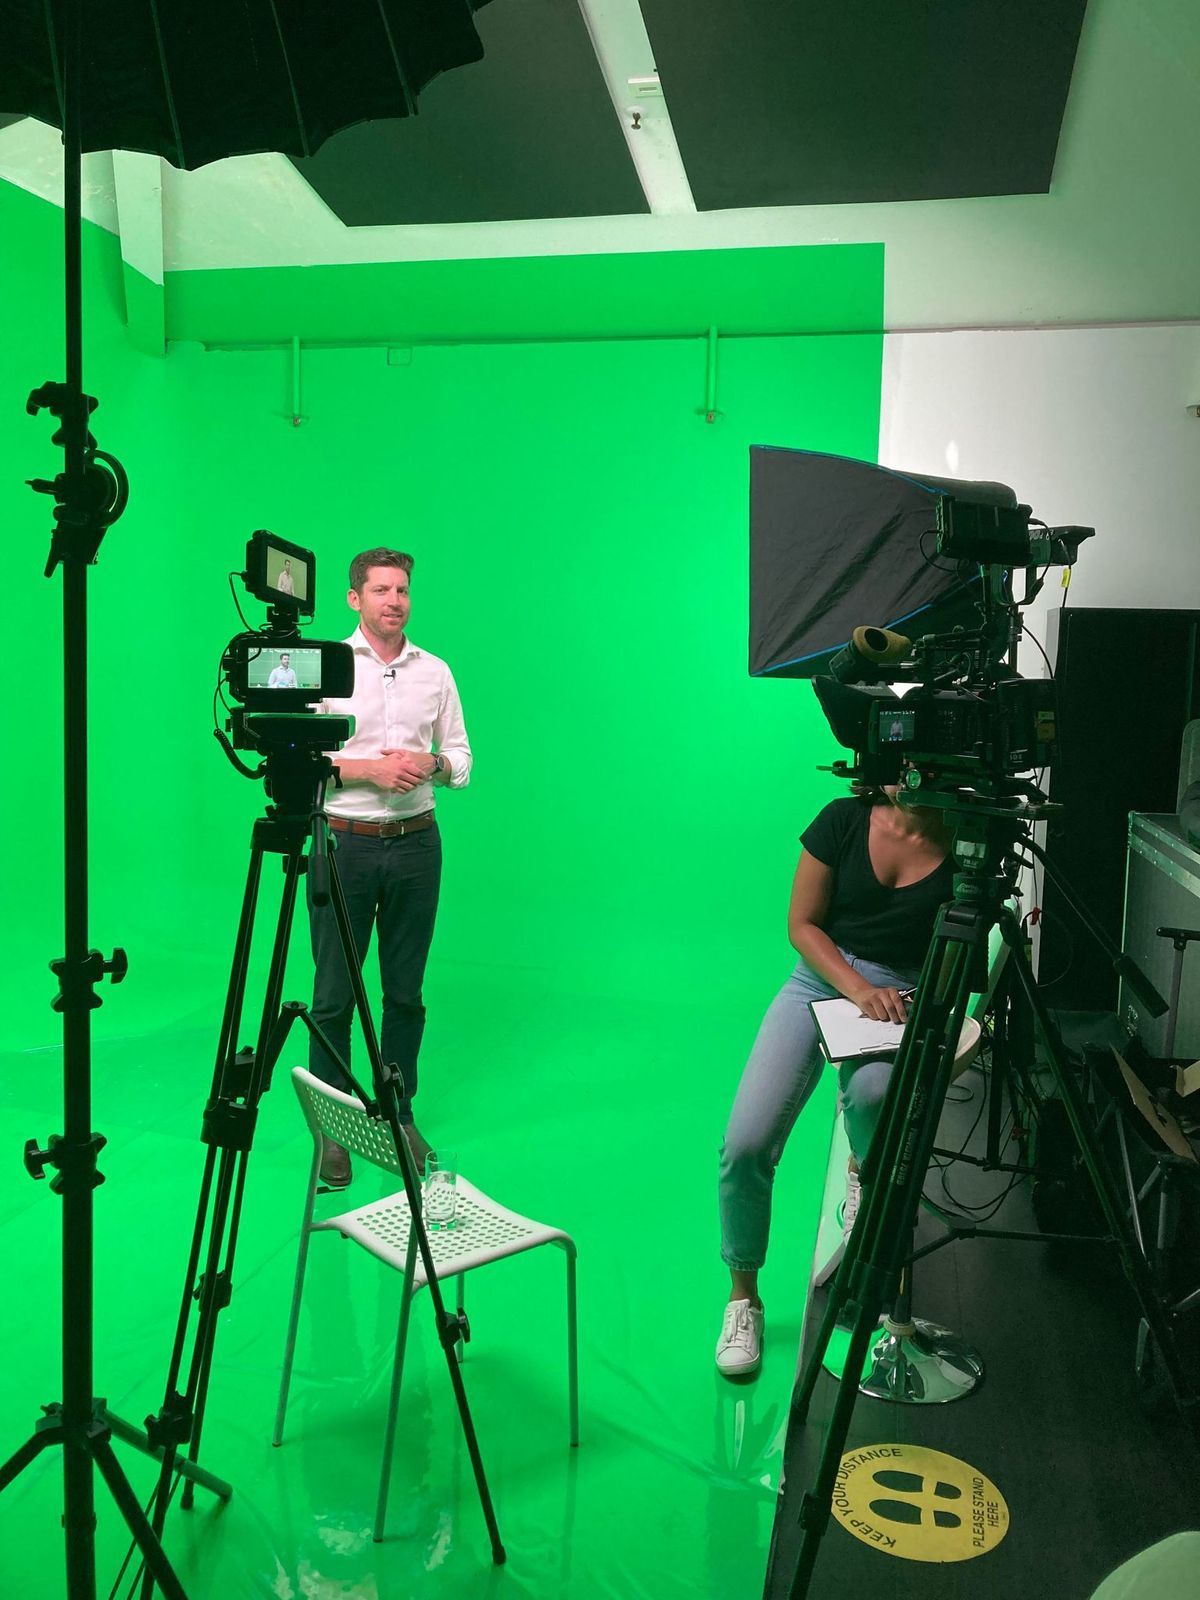 Video production scene with men capturing green screen sequences in Melbourne